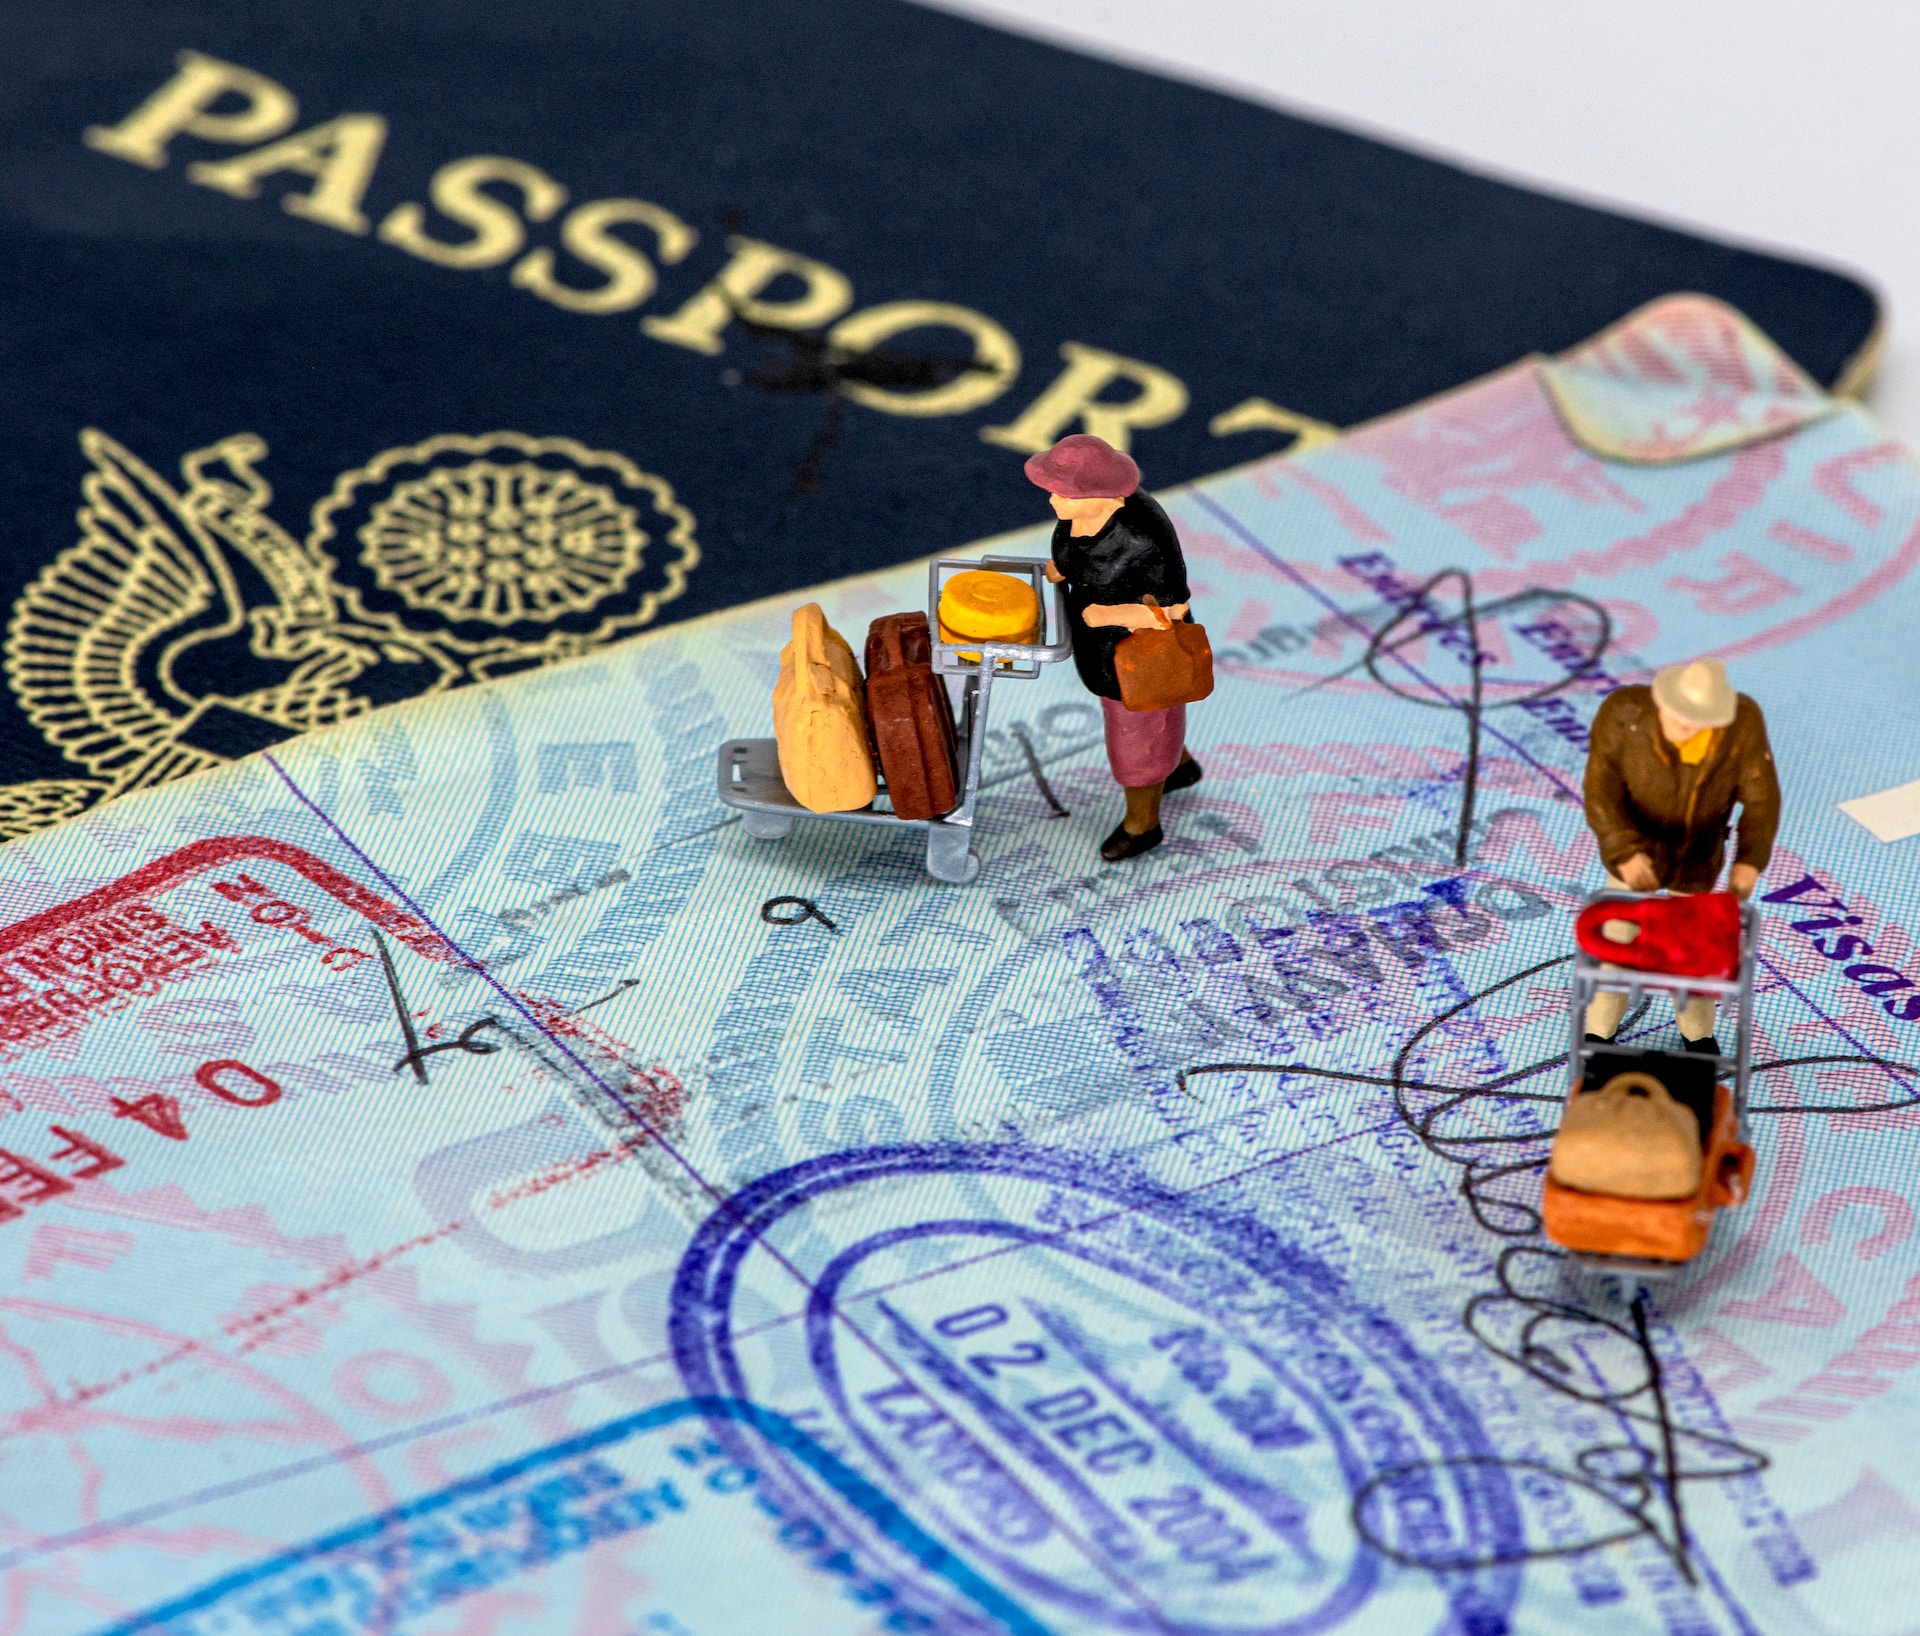 description: A close-up photo of a US passport. Two plastic figurines – people pushing luggage carts – are positioned on the page. Photo by mana5280 on Unsplash.